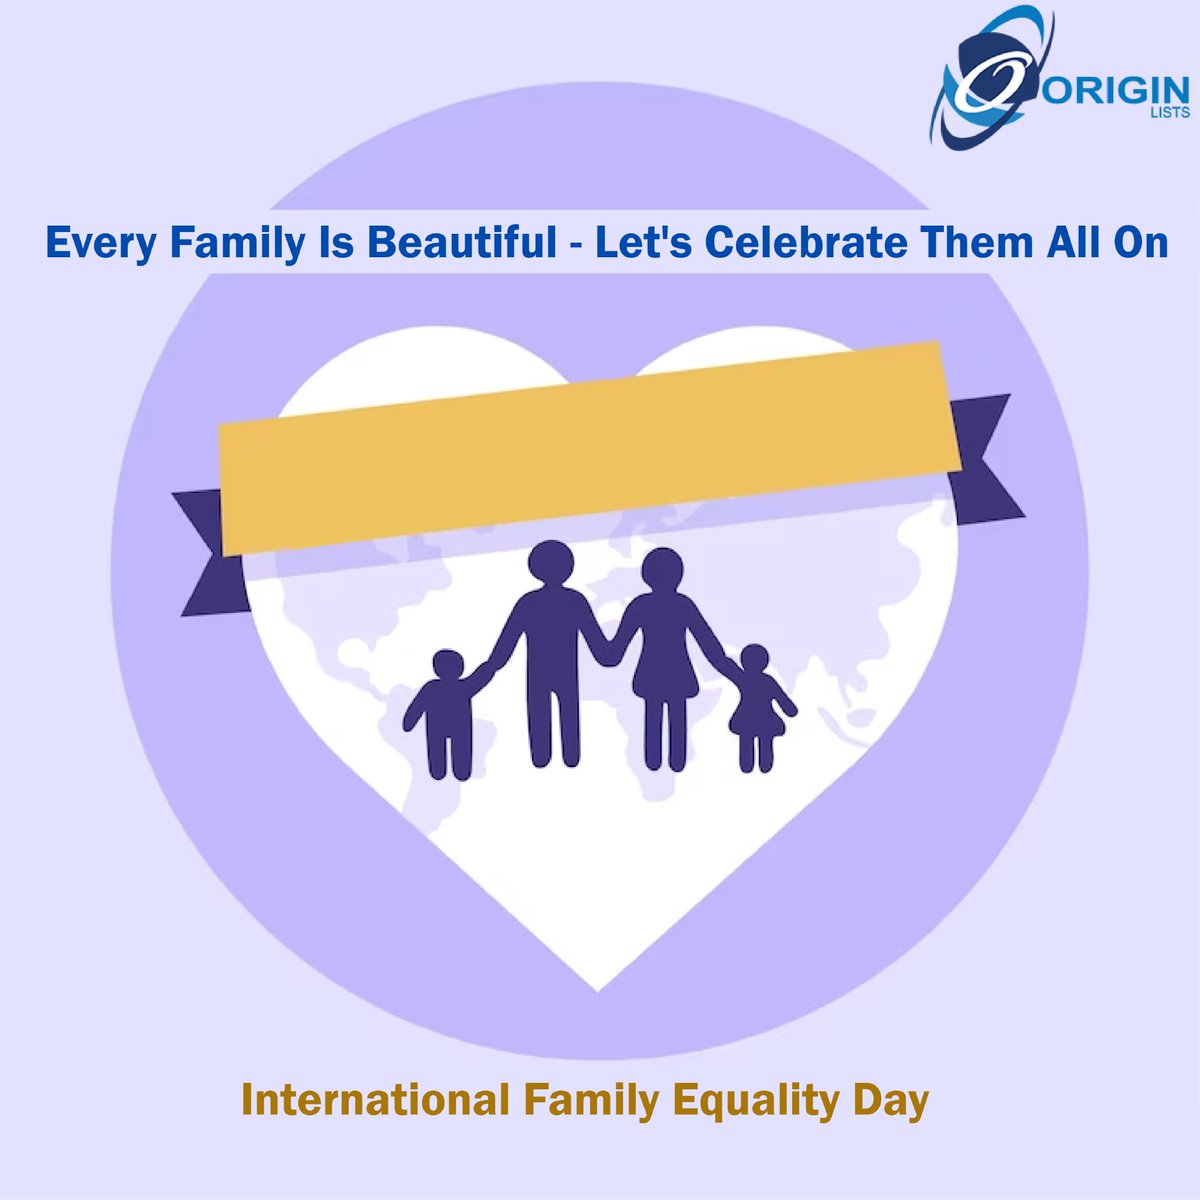 Diversity is the strength of families. On this International Family Equality Day, we celebrate the beauty and uniqueness of every family.

#InternationalFamilyEqualityDay #IFEday2023 #FamilyEquality #LoveMakesAFamily #FamilyDiversity #ModernFamily #EqualParenting #RainbowFamilies